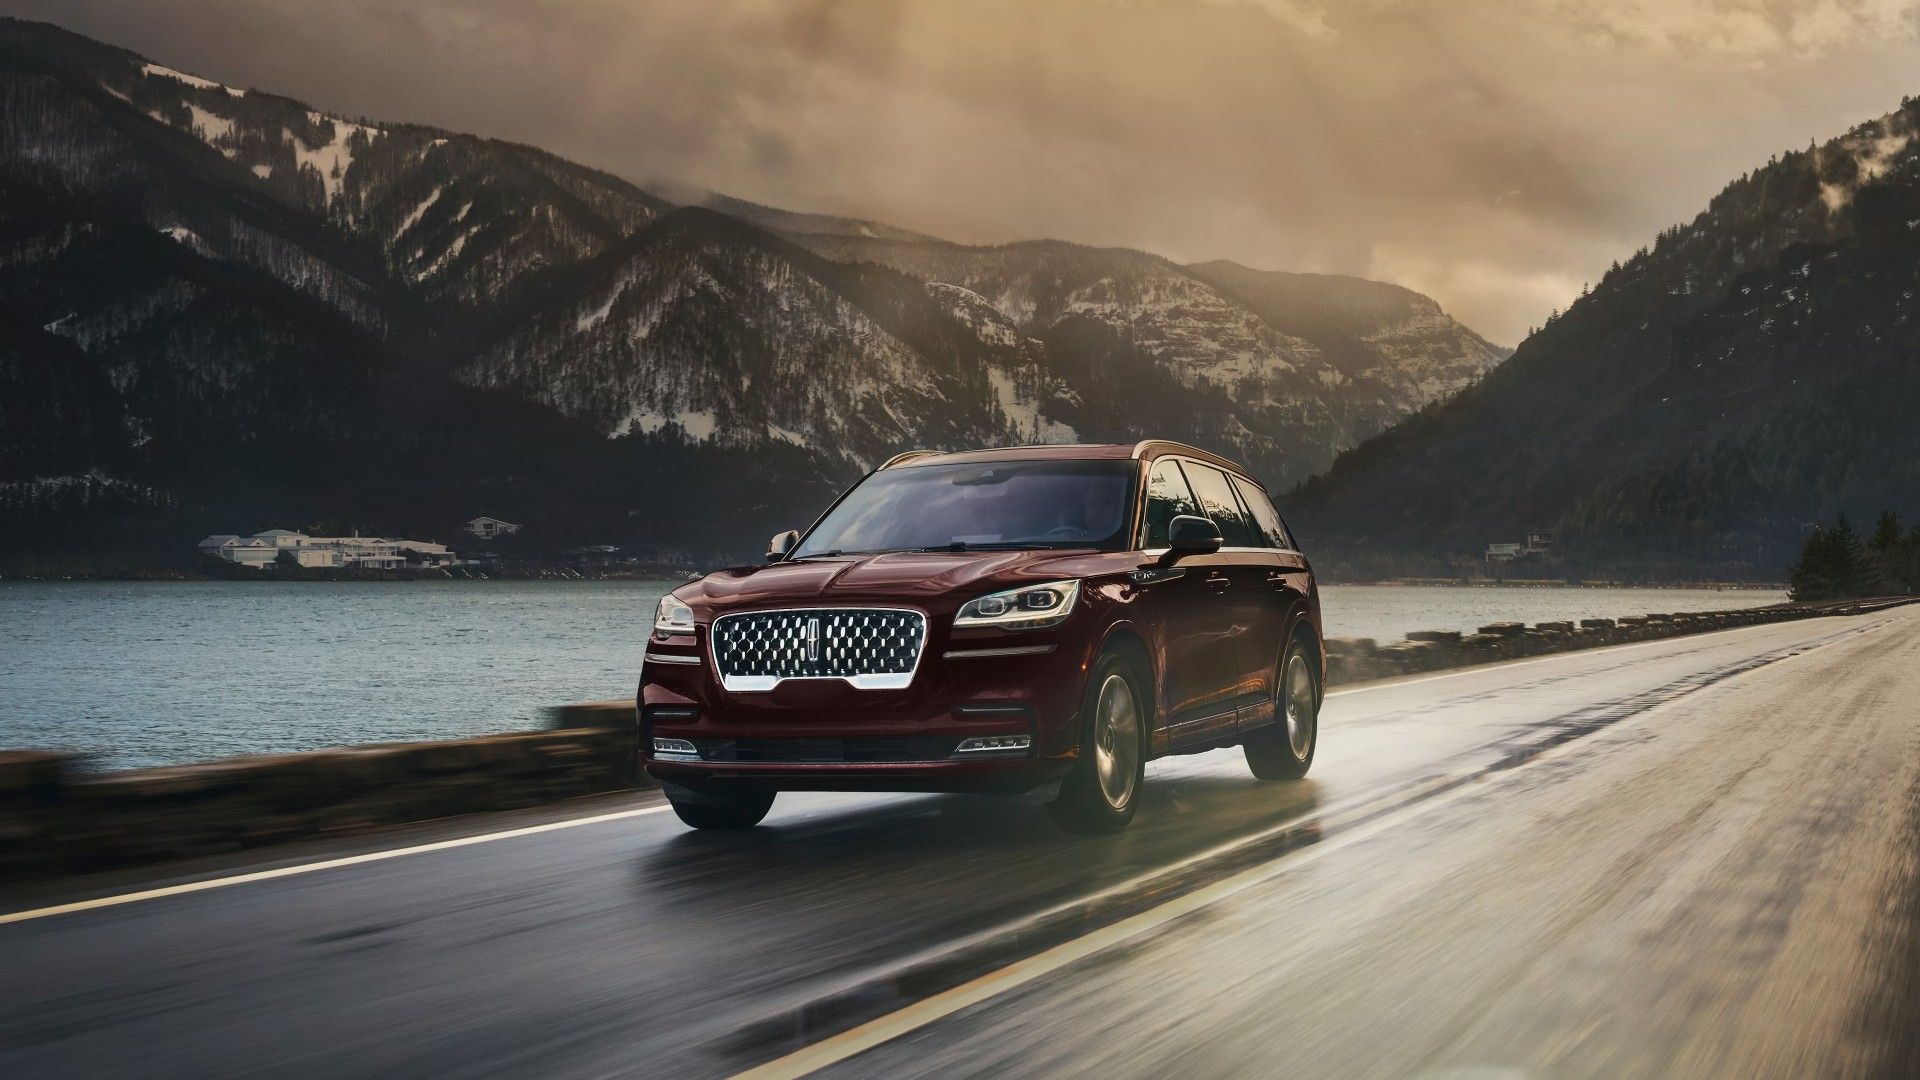 Front 3/4 shot of a The Lincoln Aviator Black Label cruising through mountainous road.